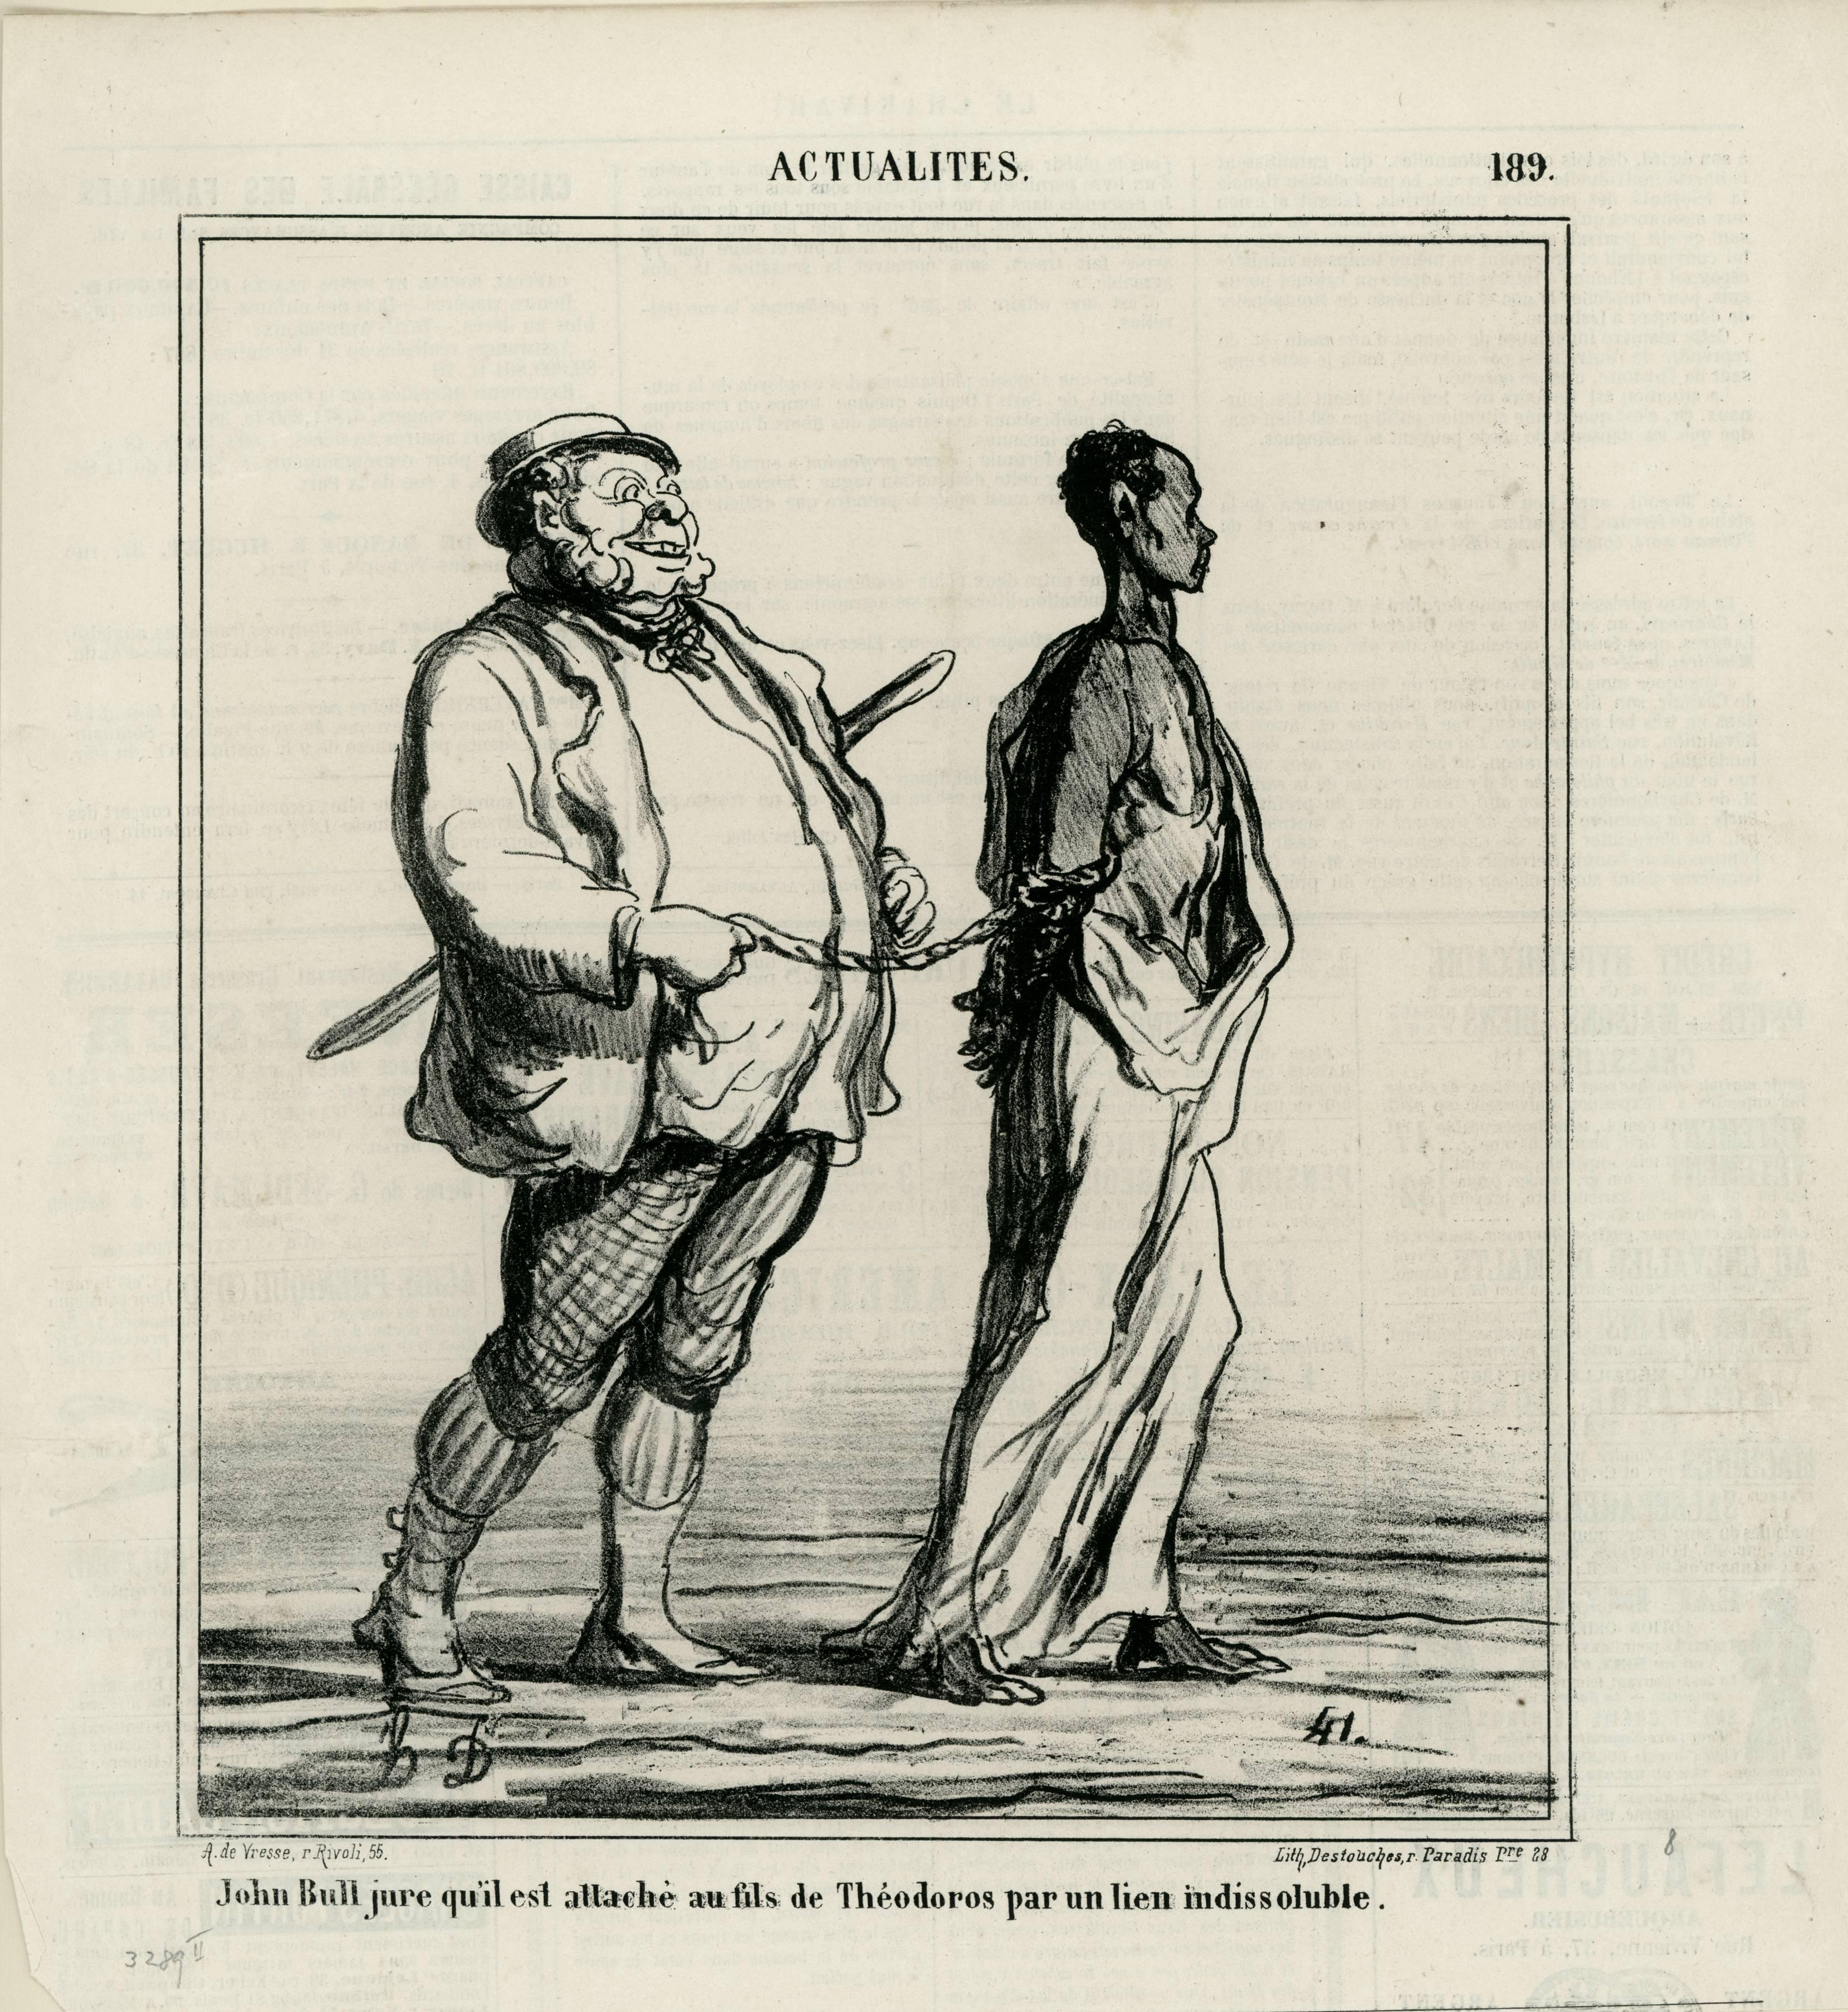 John Bull vows that he is tied to the son of Theodorus by an indissoluble band. - Print by Honoré Daumier